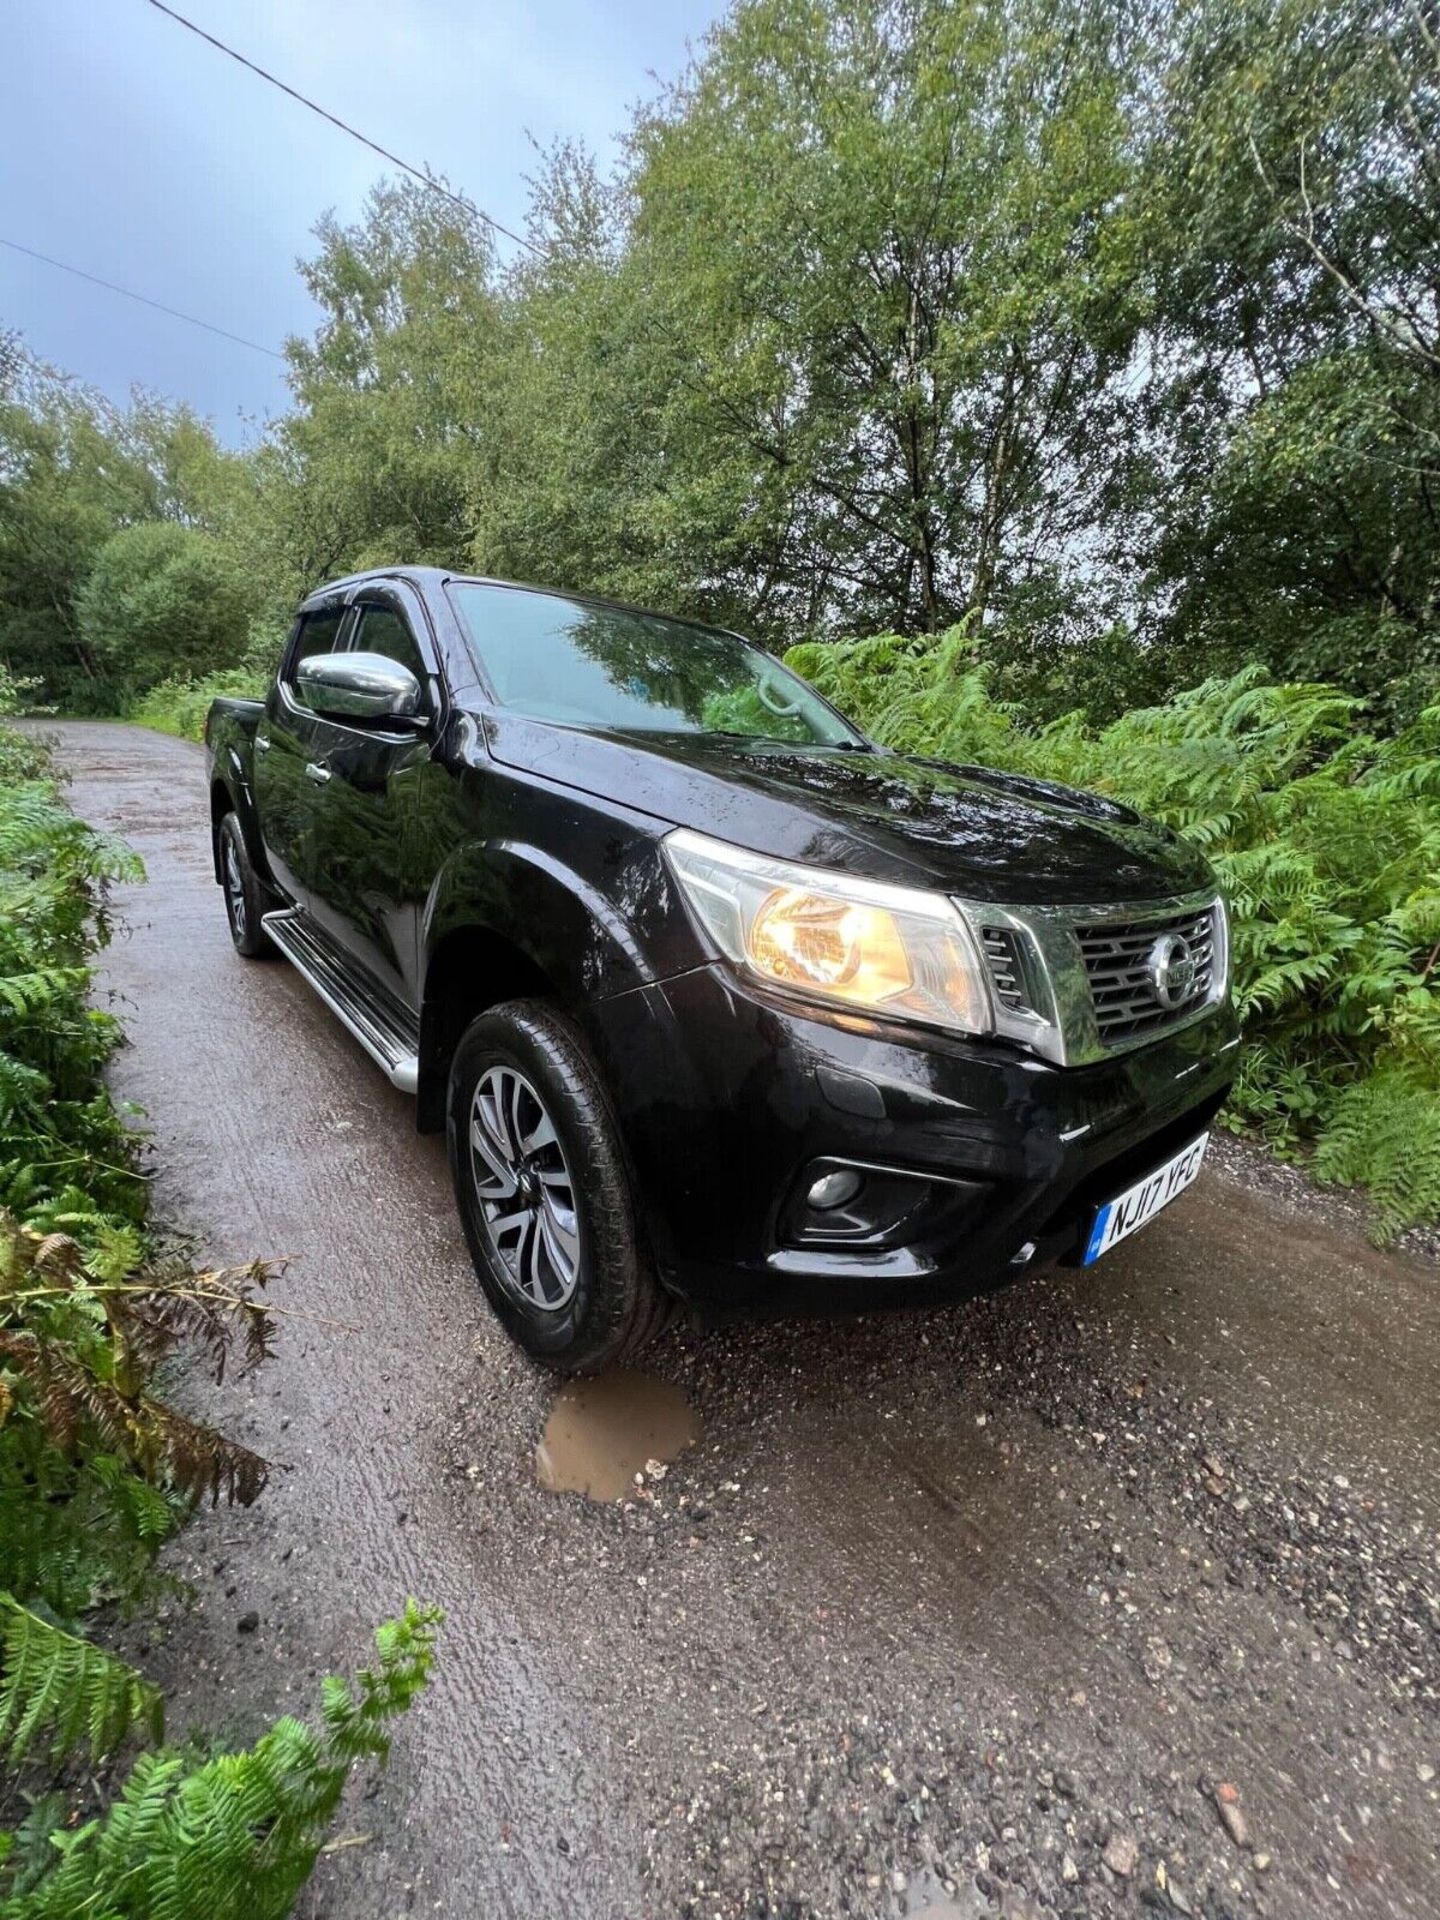 2017 NISSAN NAVARA DOUBLE CAB PICKUP TRUCK TWIN CAB EURO 6 2.3 DCI 4X4 4WD - Image 2 of 12